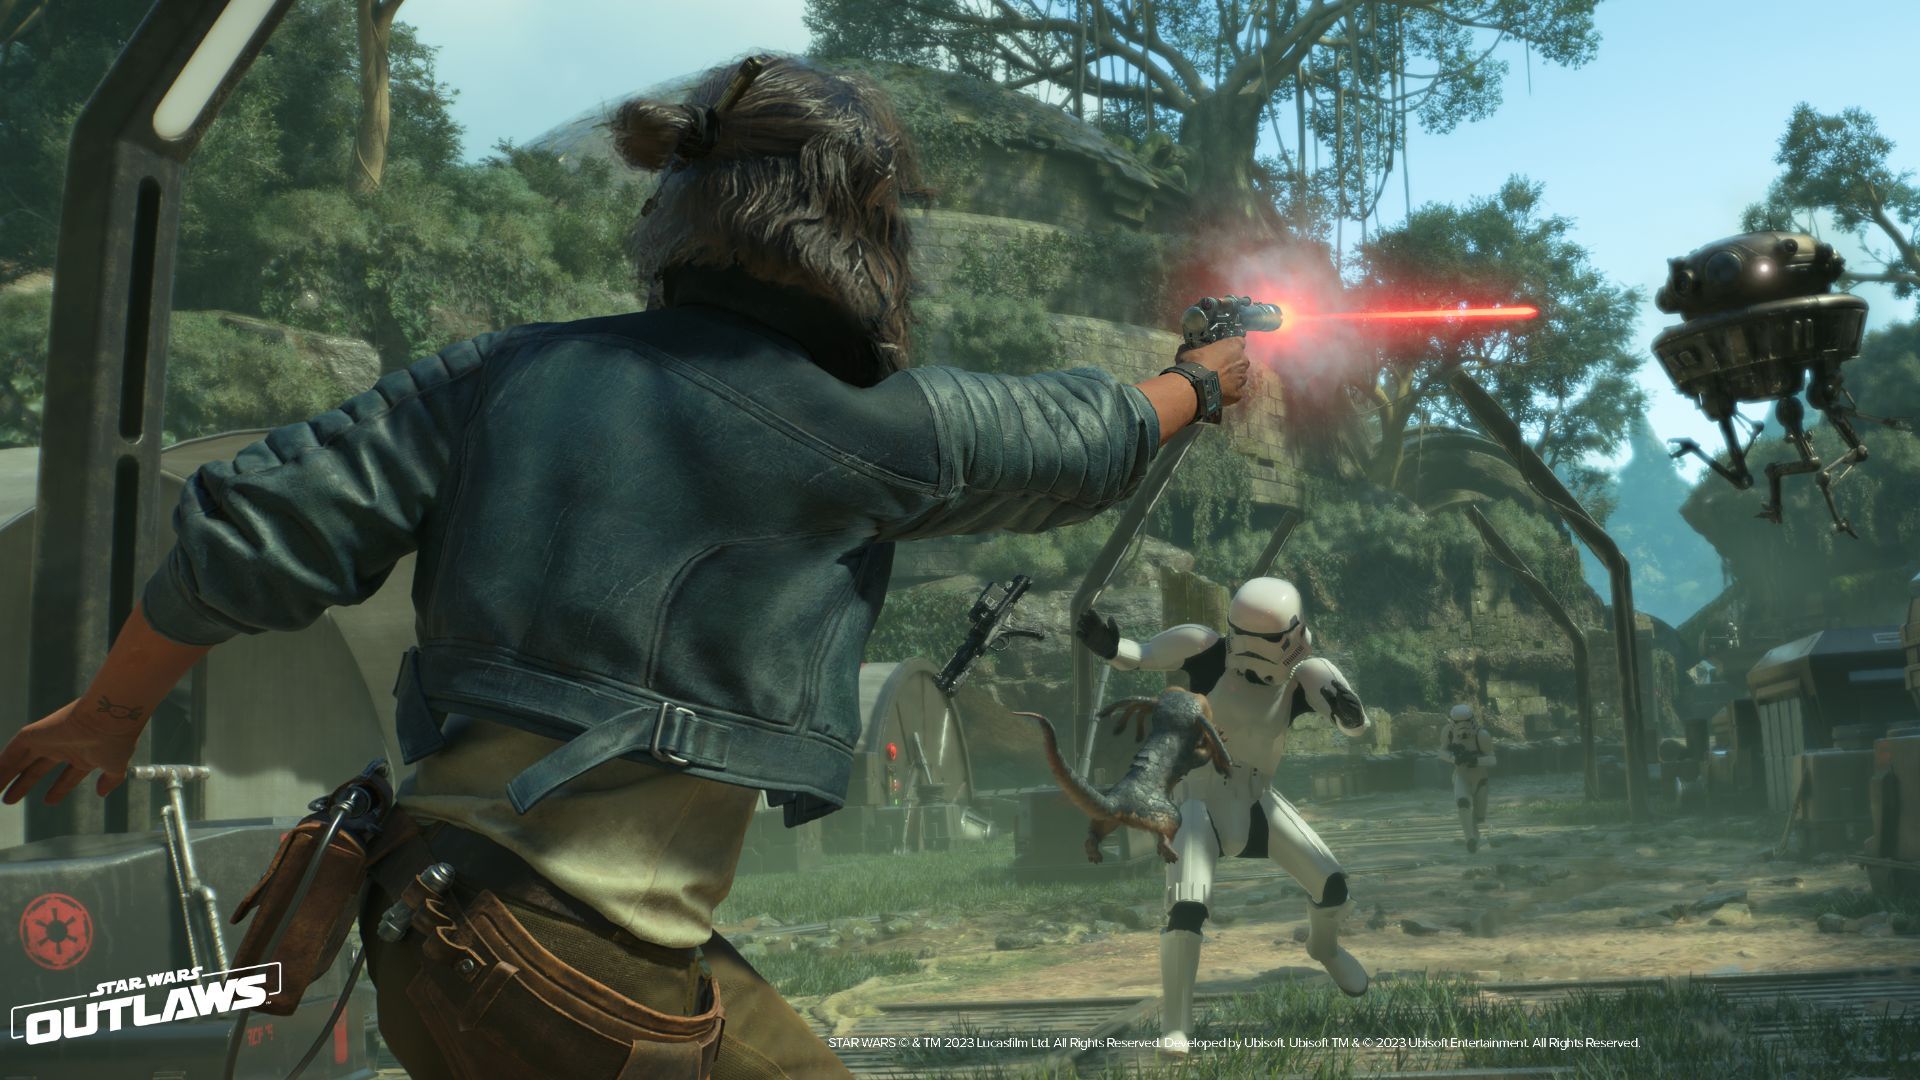 Star Wars Outlaws Release Date Revealed With New Gameplay Trailer